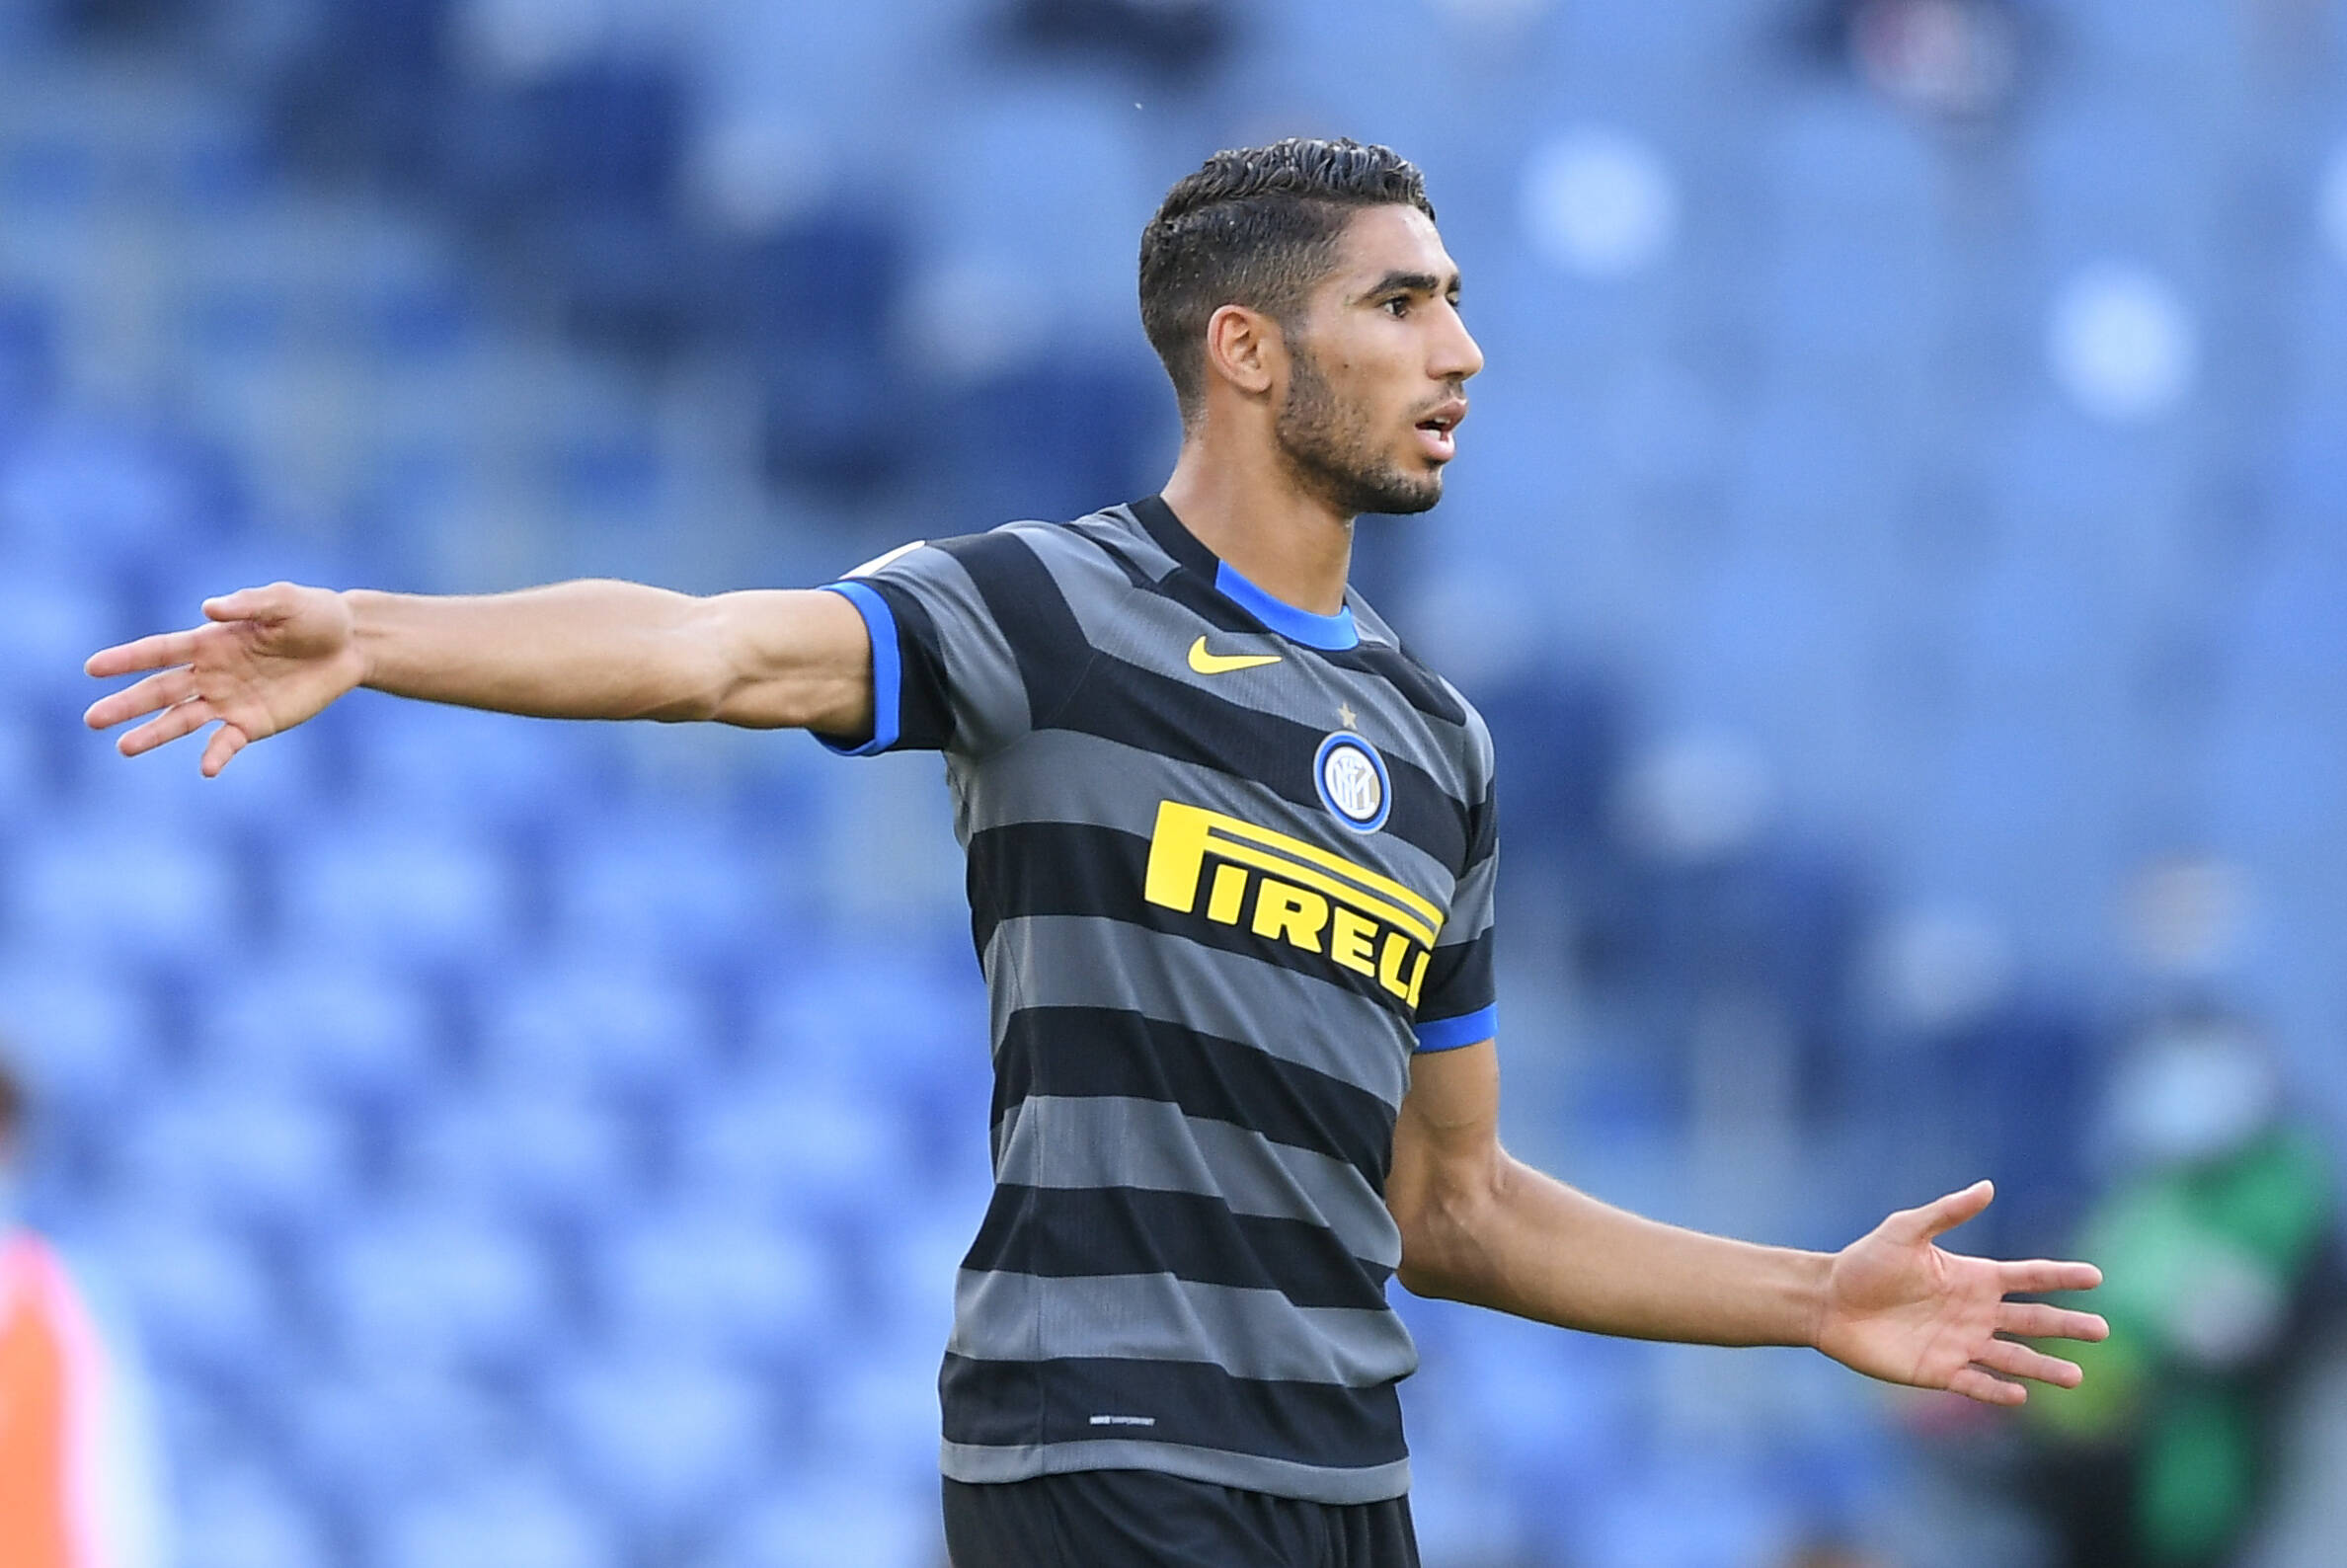 hakimi vidal could be dropped from inter starting xi for match vs atalanta after performances vs real madrid